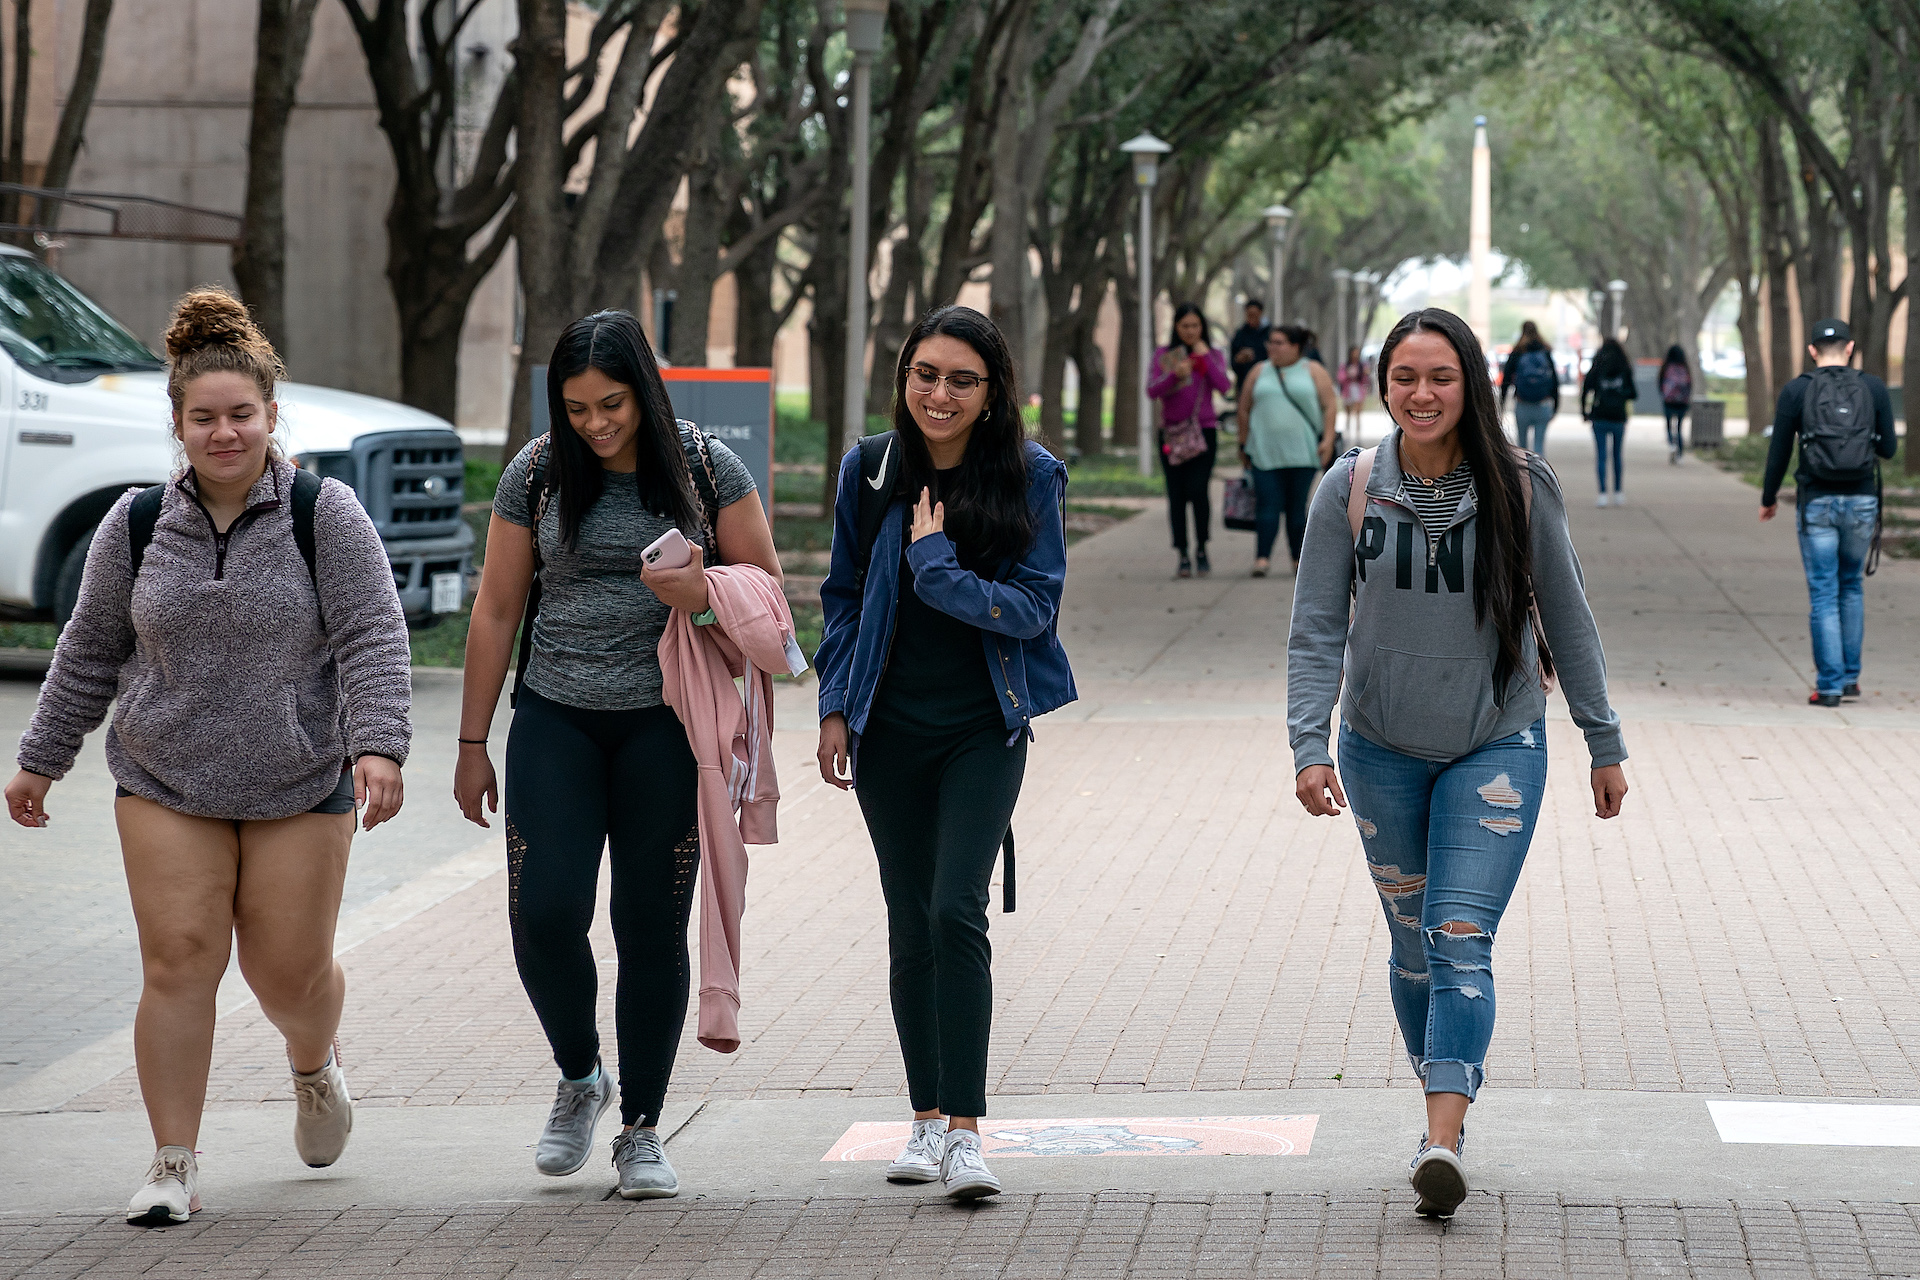 students walking and laughing on campus